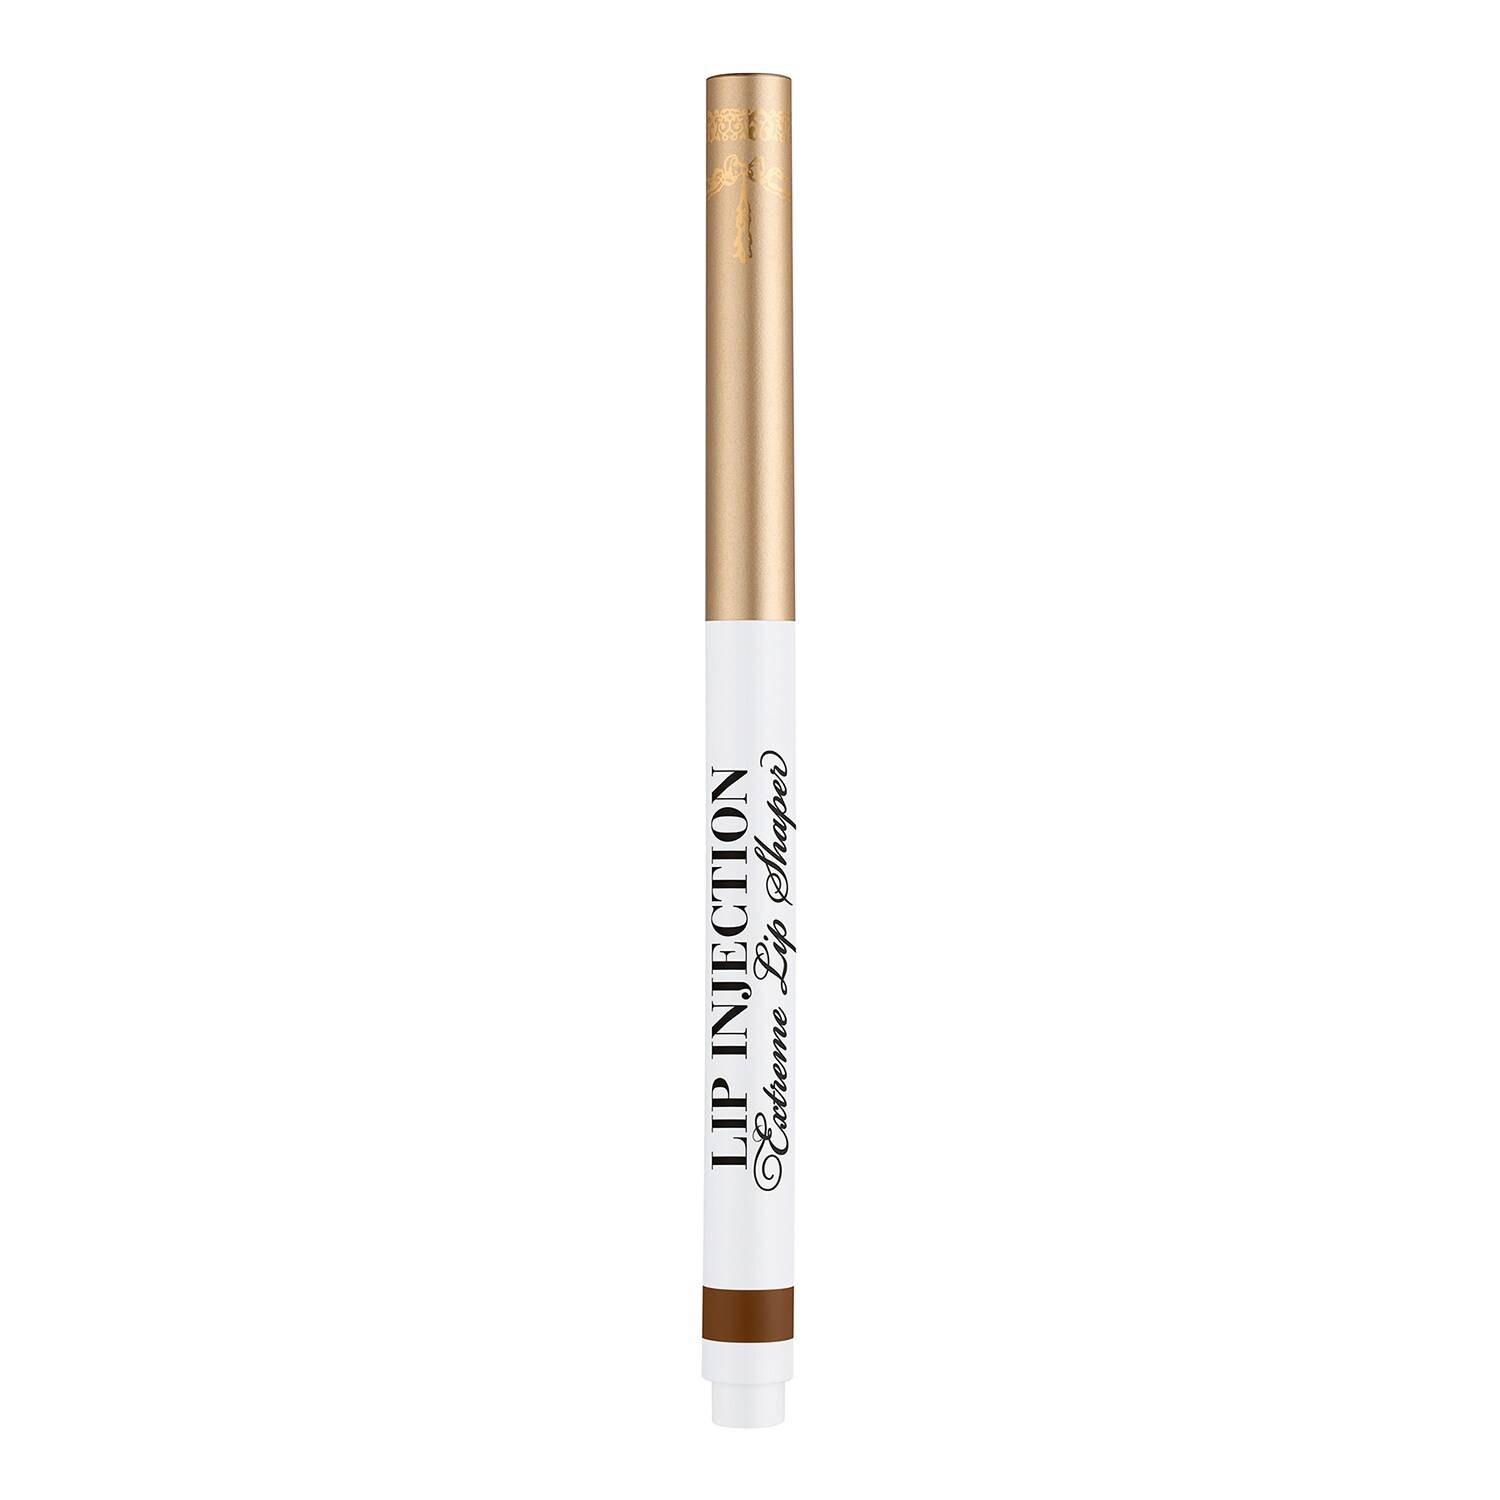 Too Faced Lip Injection Extreme Lip Shaper 0.38G Espresso Shot (0.28G)